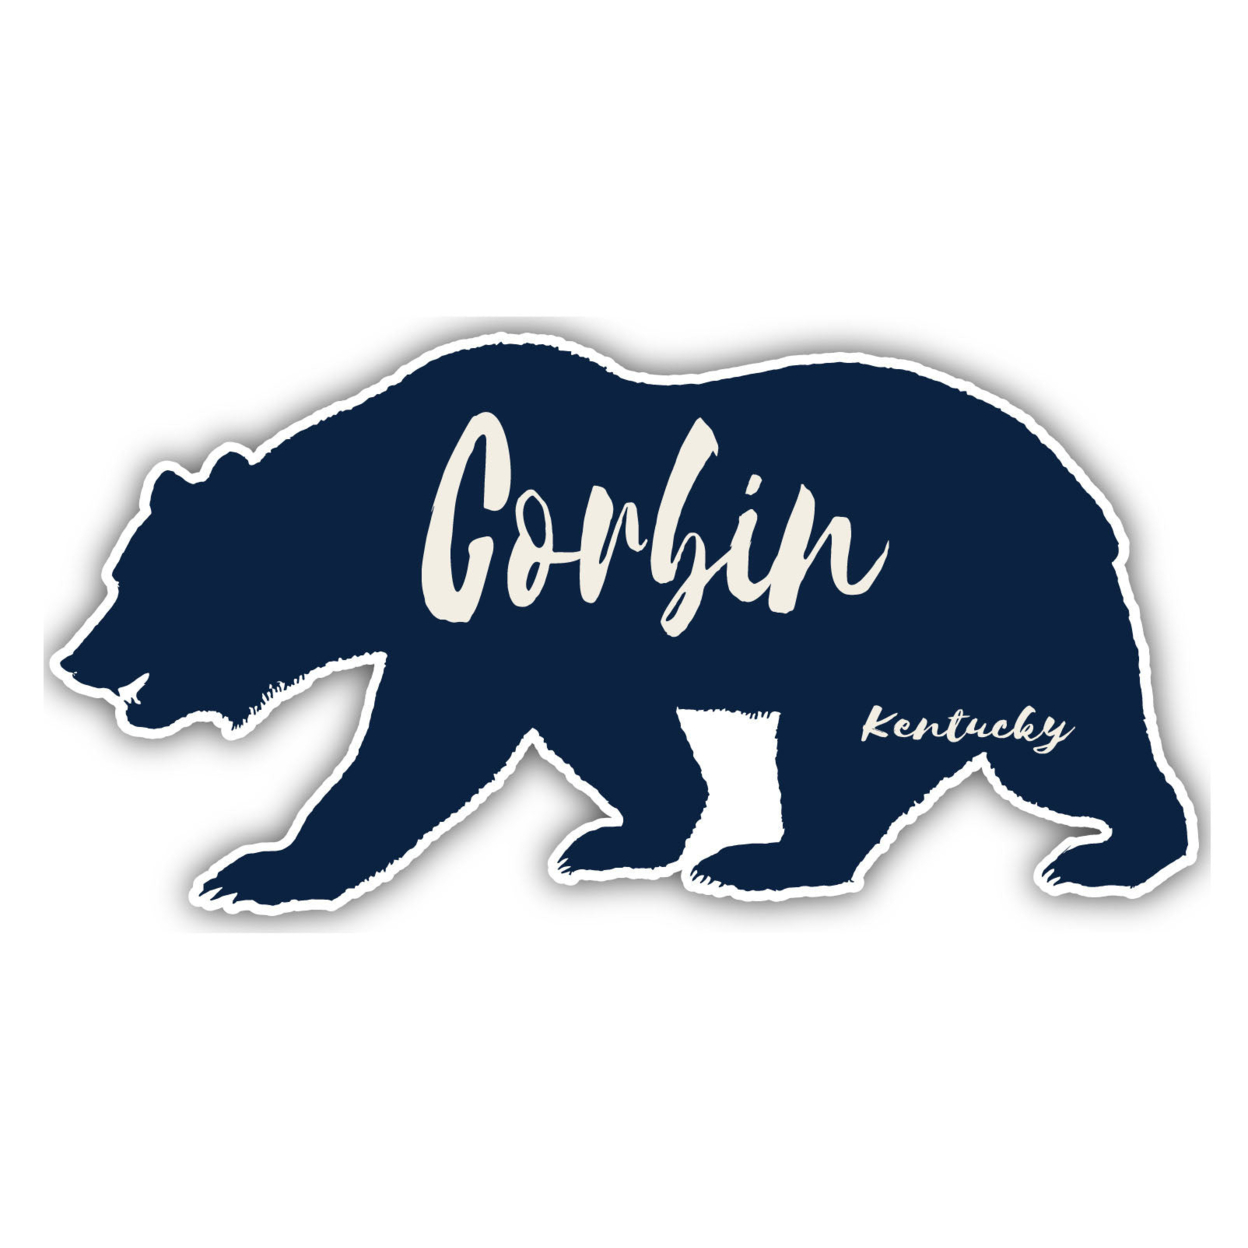 Corbin Kentucky Souvenir Decorative Stickers (Choose Theme And Size) - 4-Pack, 12-Inch, Tent